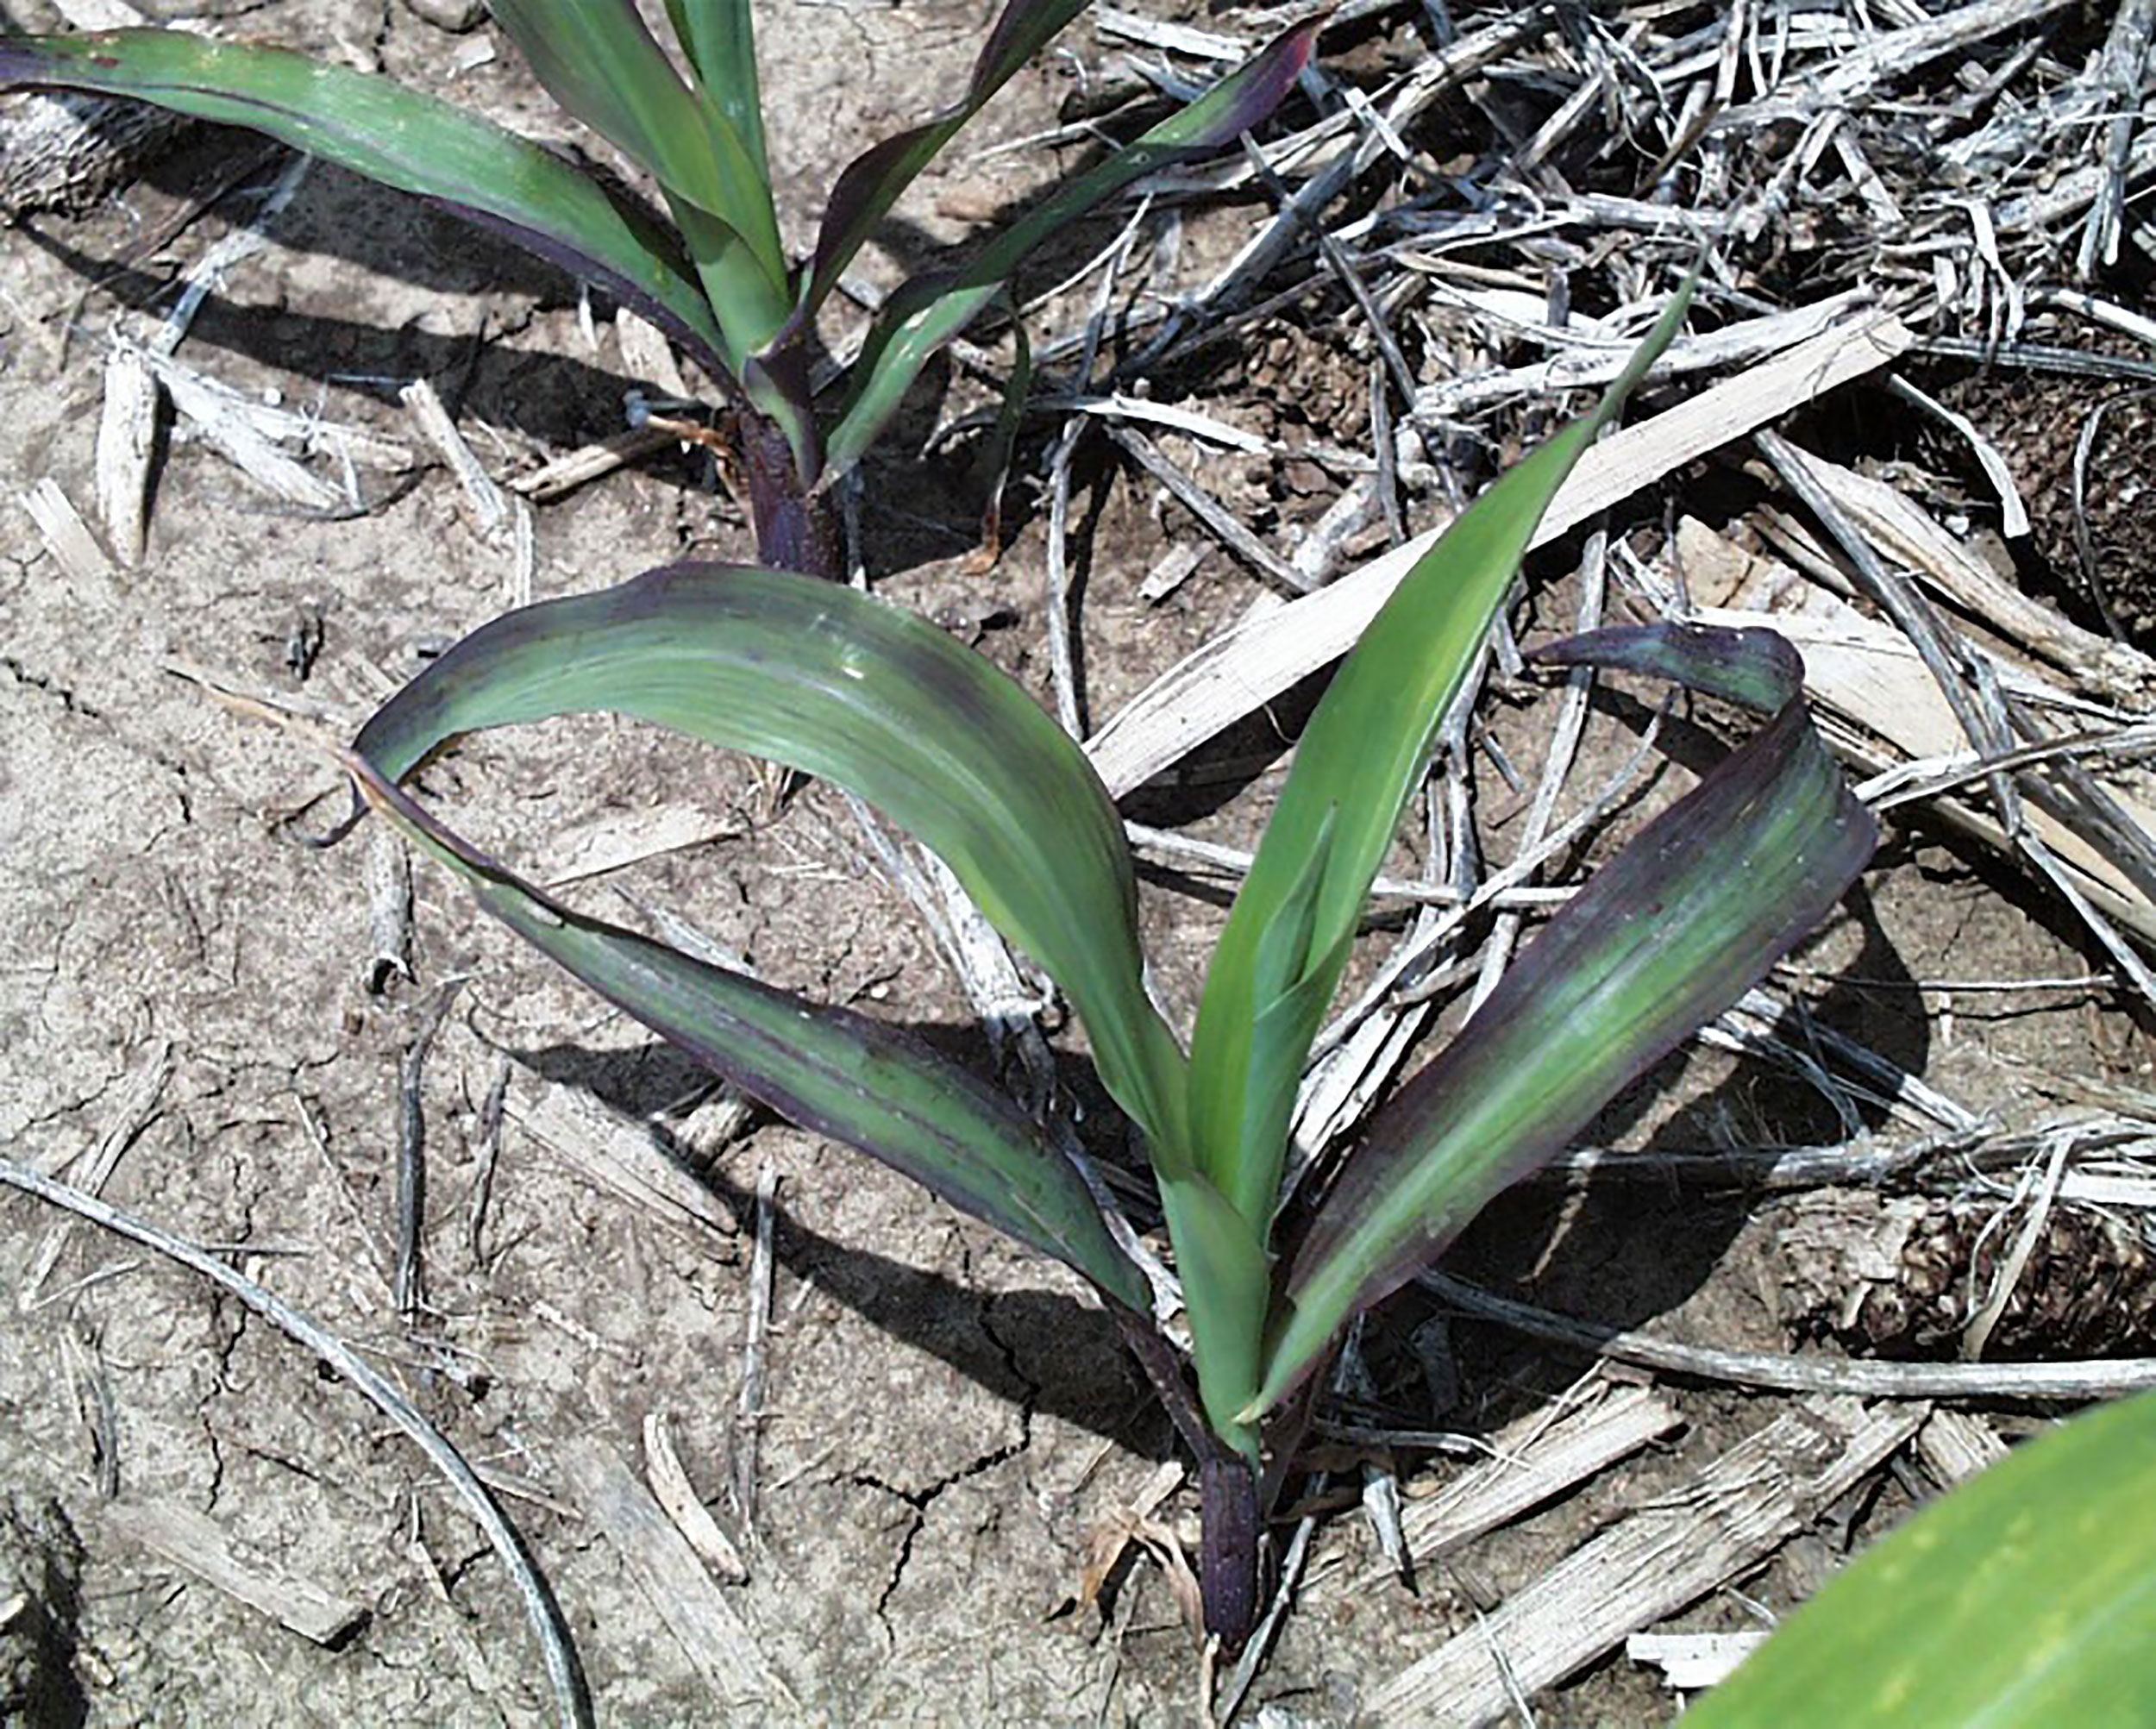 A stunted planting of corn with purple coloring on its leaves.